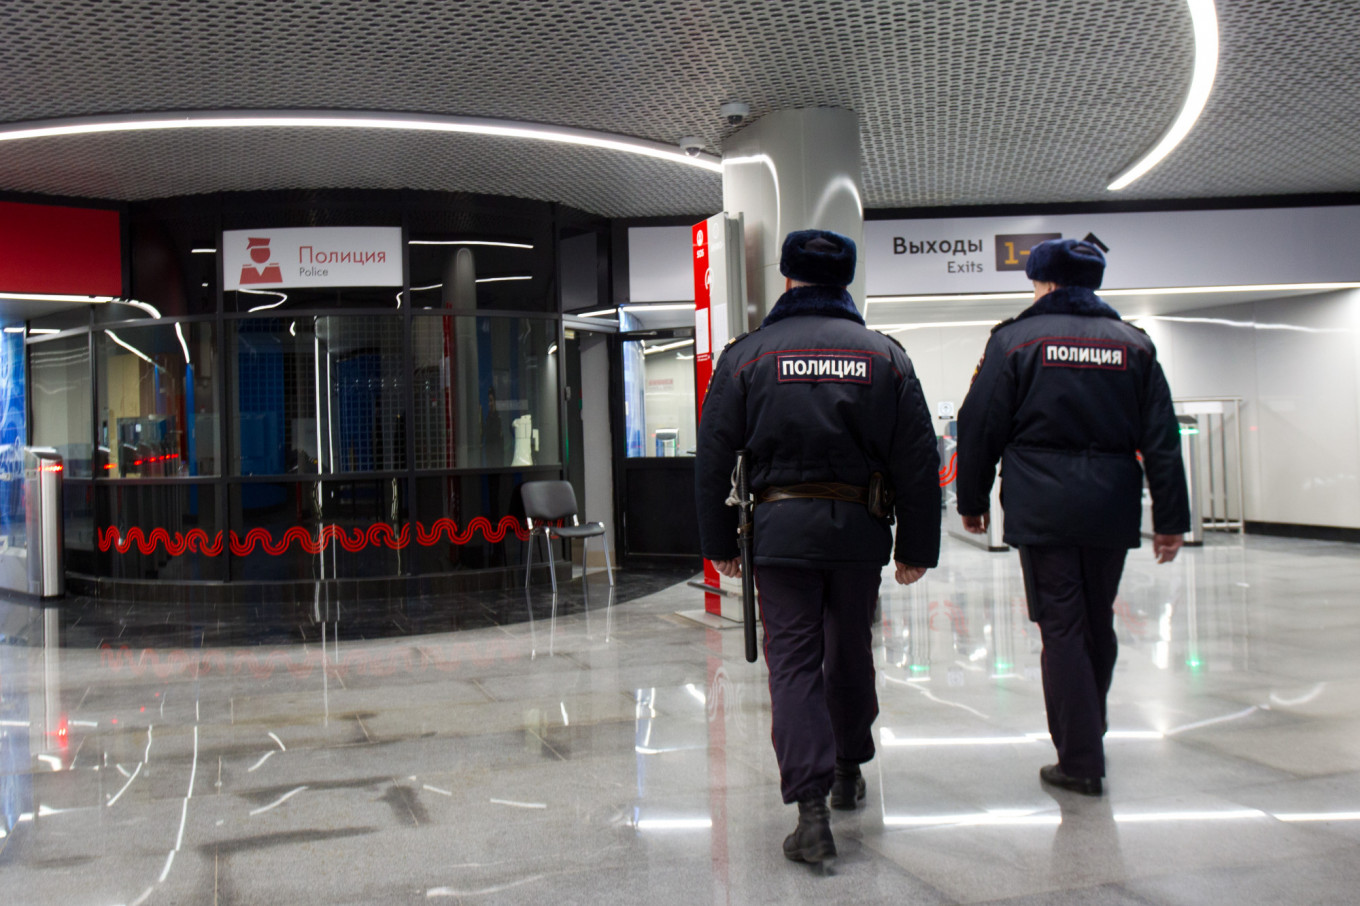 Two Dead in Moscow Metro Shooting — Reports